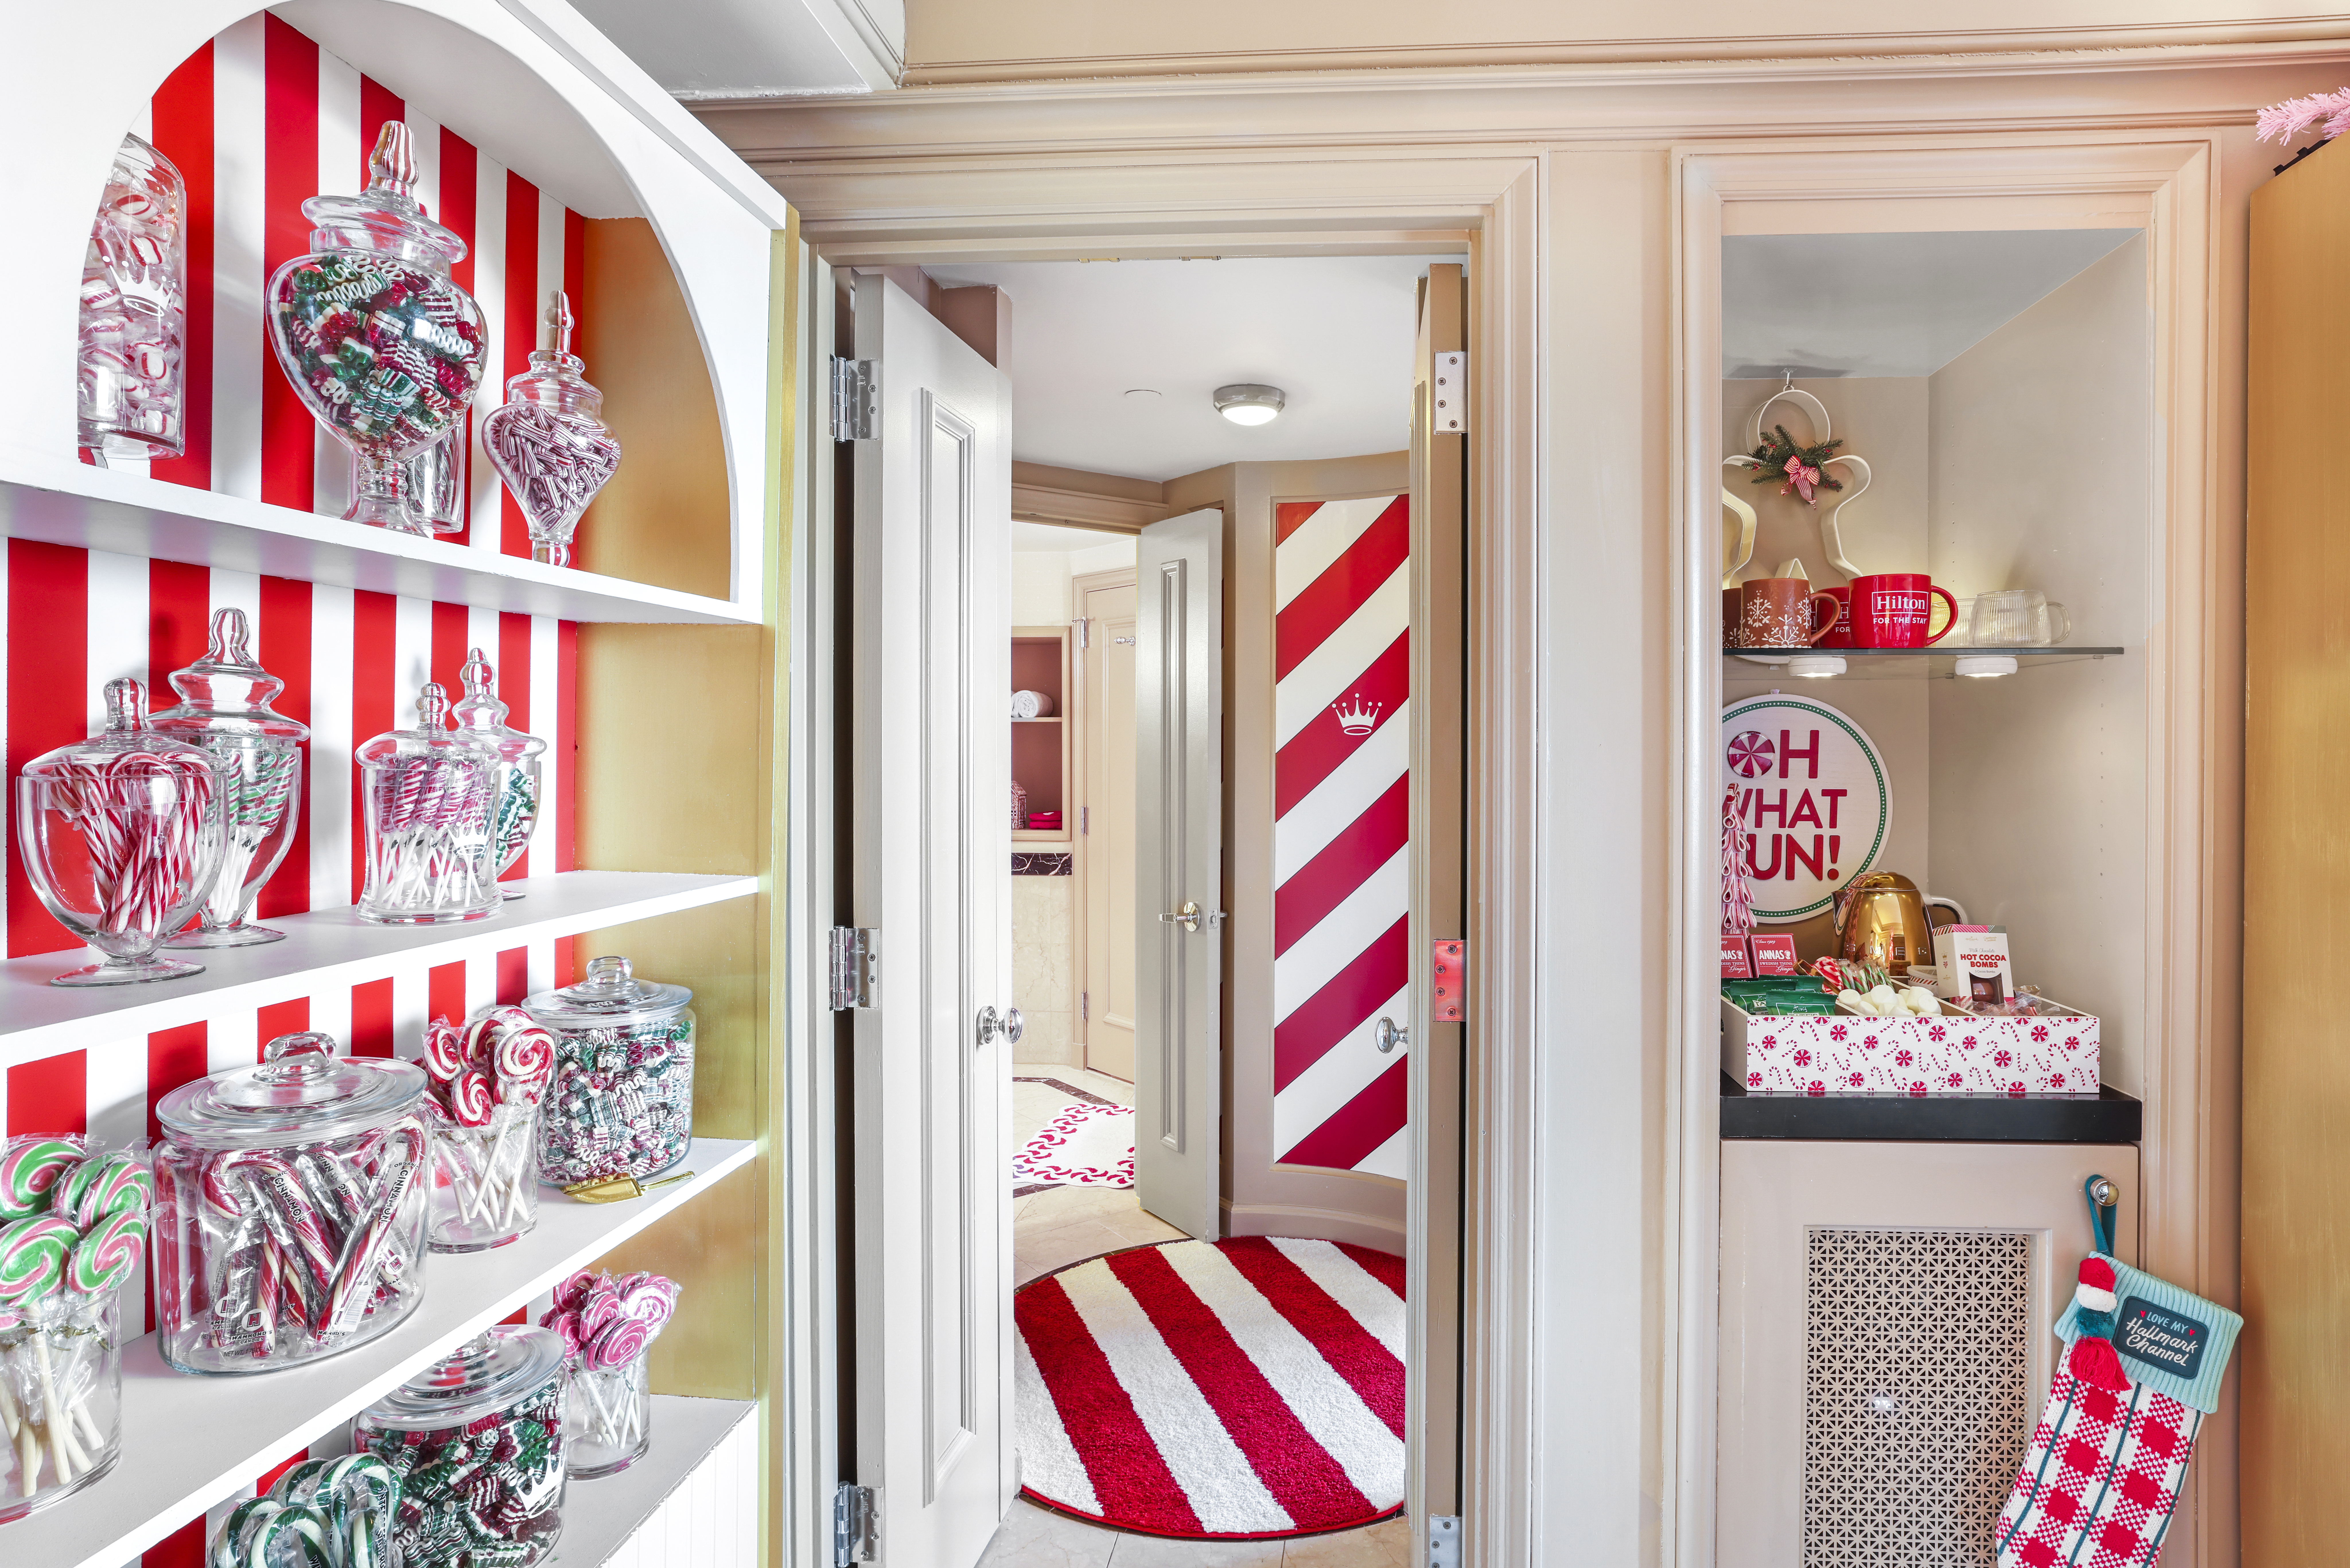 Hilton and Hallmark Channel - Hallmark’s Holiday Sweetest Suite at Hilton New York Times Square - Hallmark Channel Candy Store and Decor